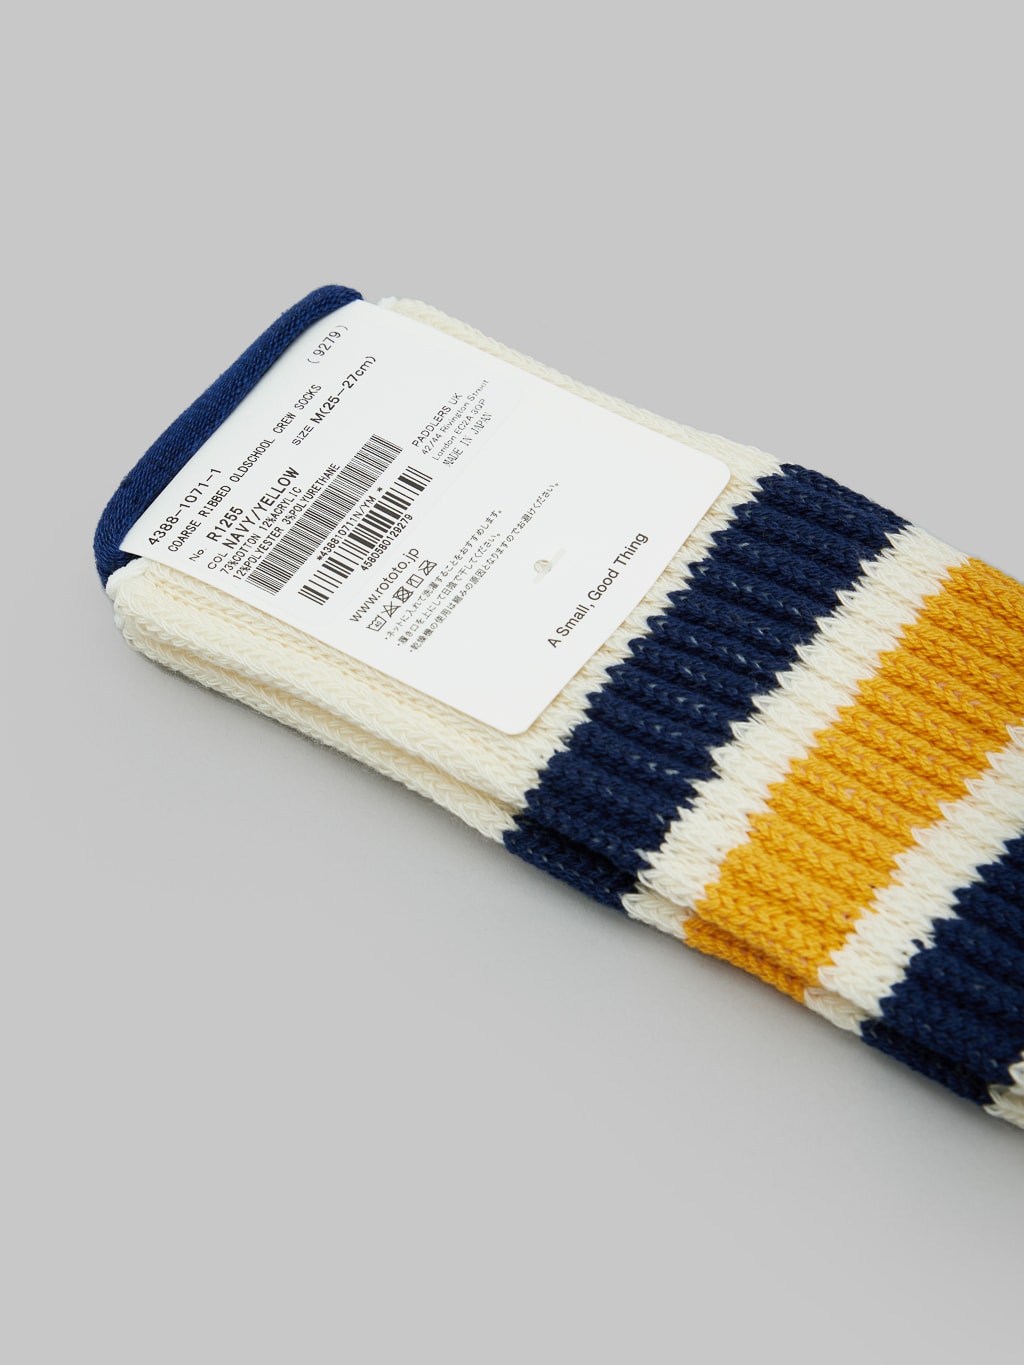 rototo coarse ribbed oldschool crew socks navy yellow back label details